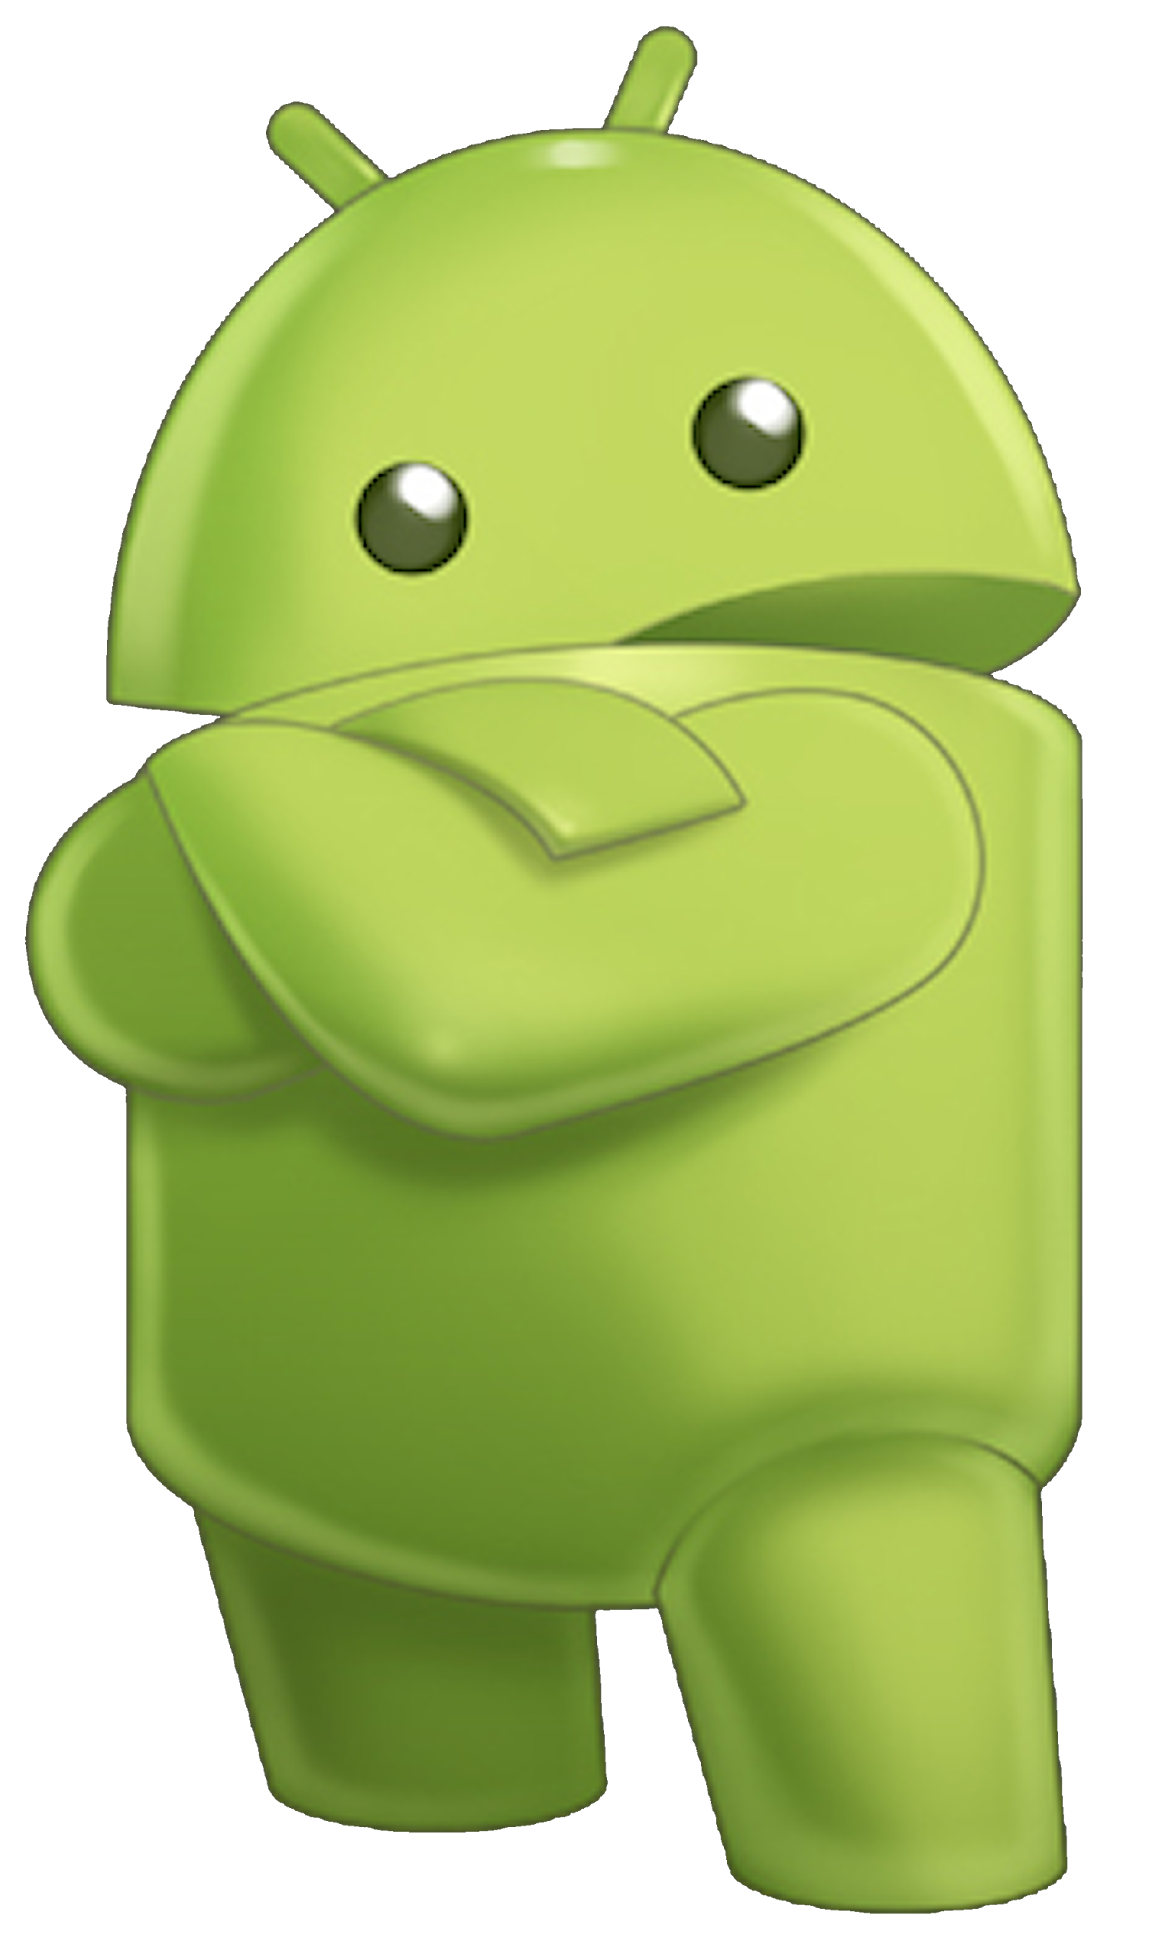 android clipart icon - photo #38